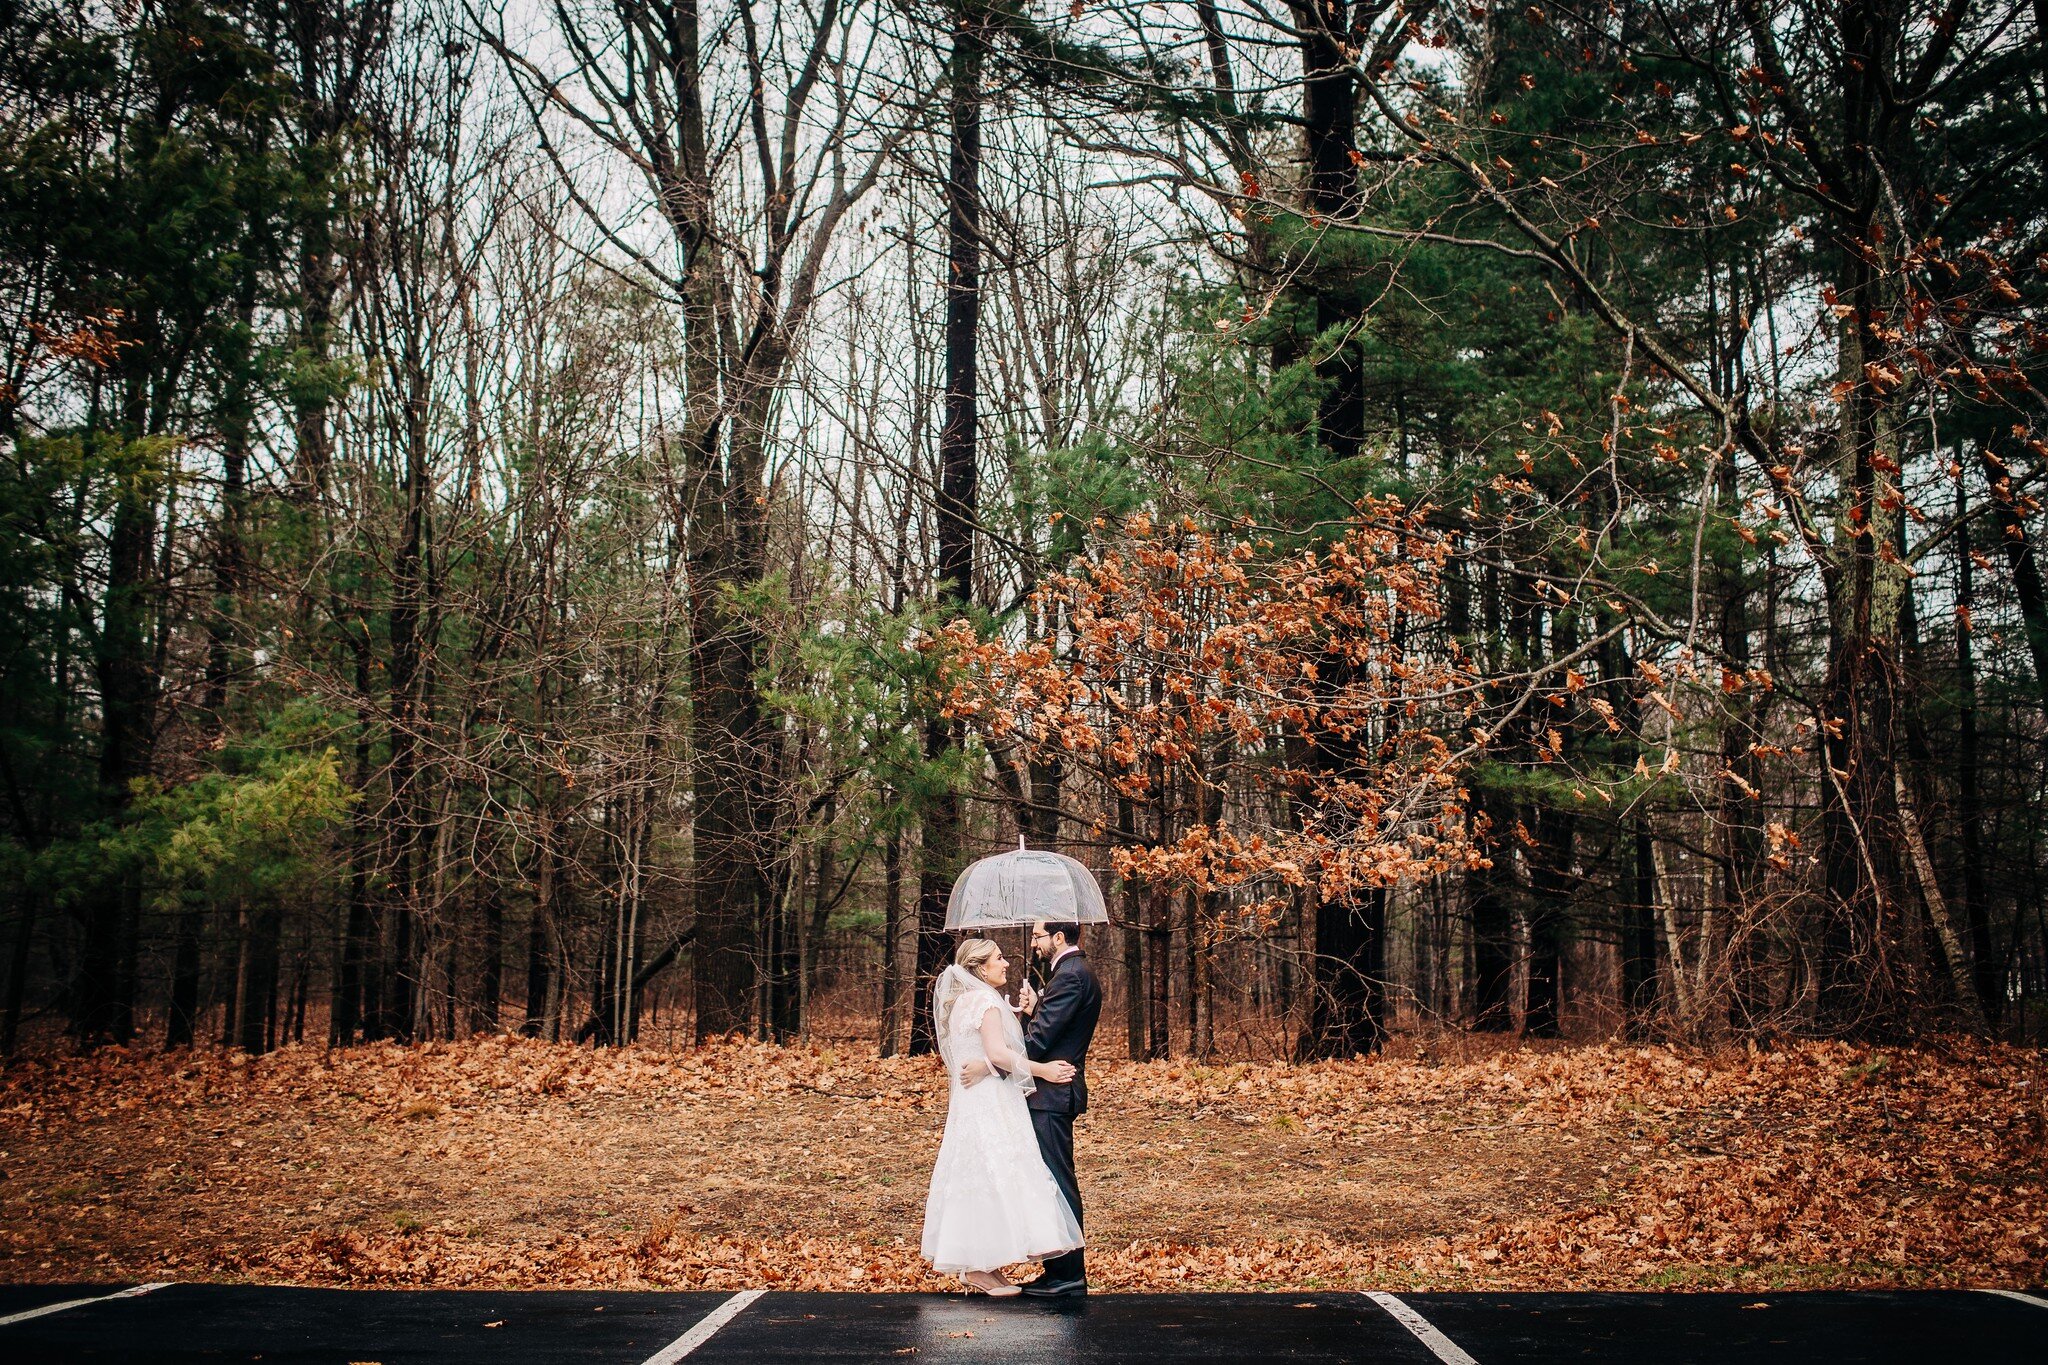 As a wedding photographer who primarily works in the Hudson Valley, it is not often that I get to journey to Albany for a wedding day, but when I do, it&rsquo;s always a treat. There&rsquo;s something about the hustle and bustle of Albany that is app